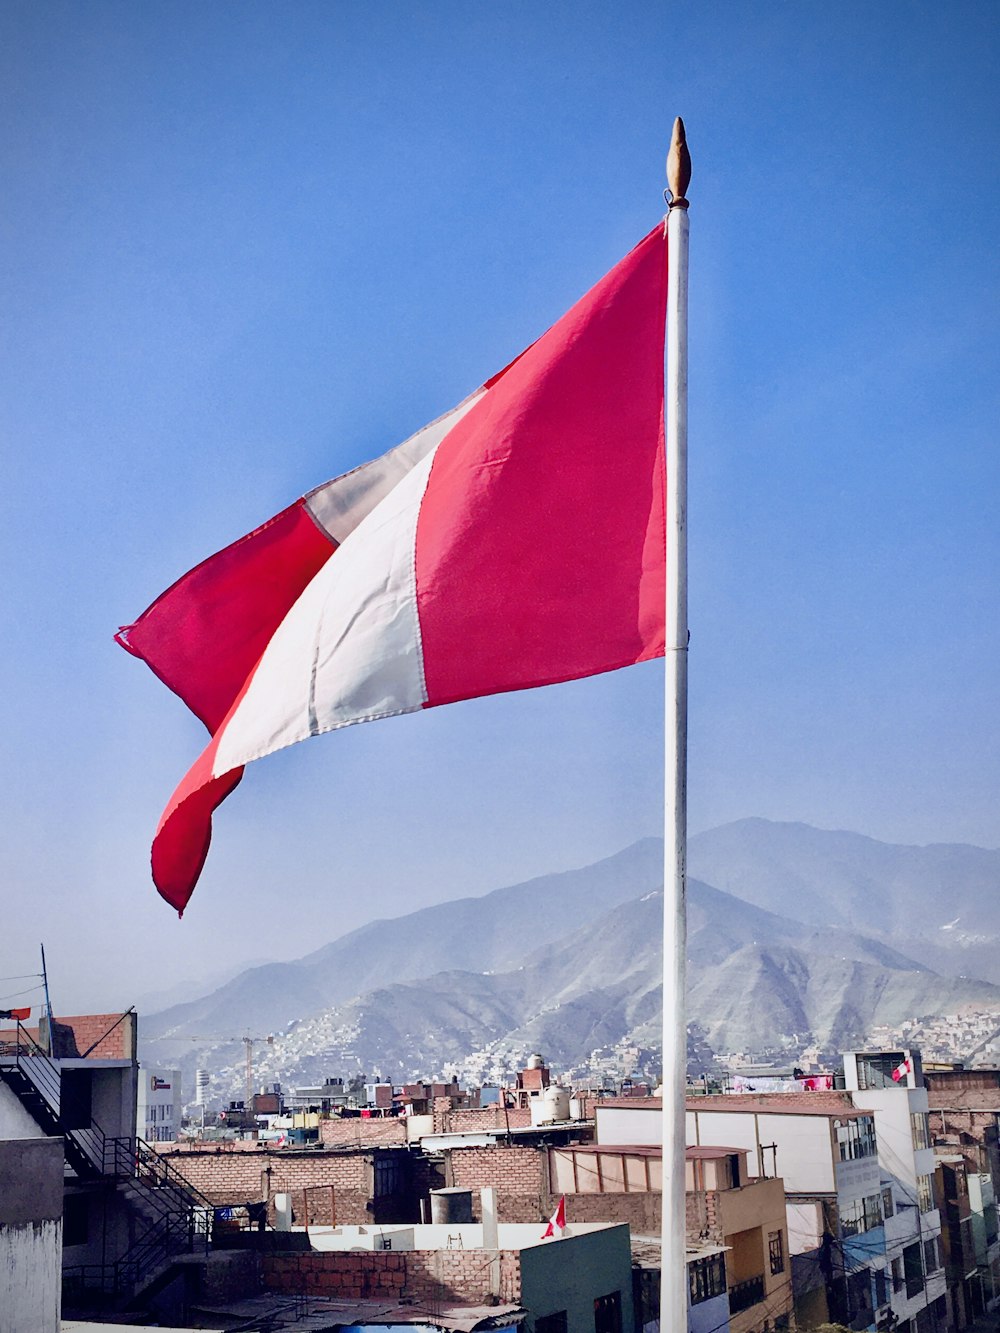 white red and blue flag on pole during daytime